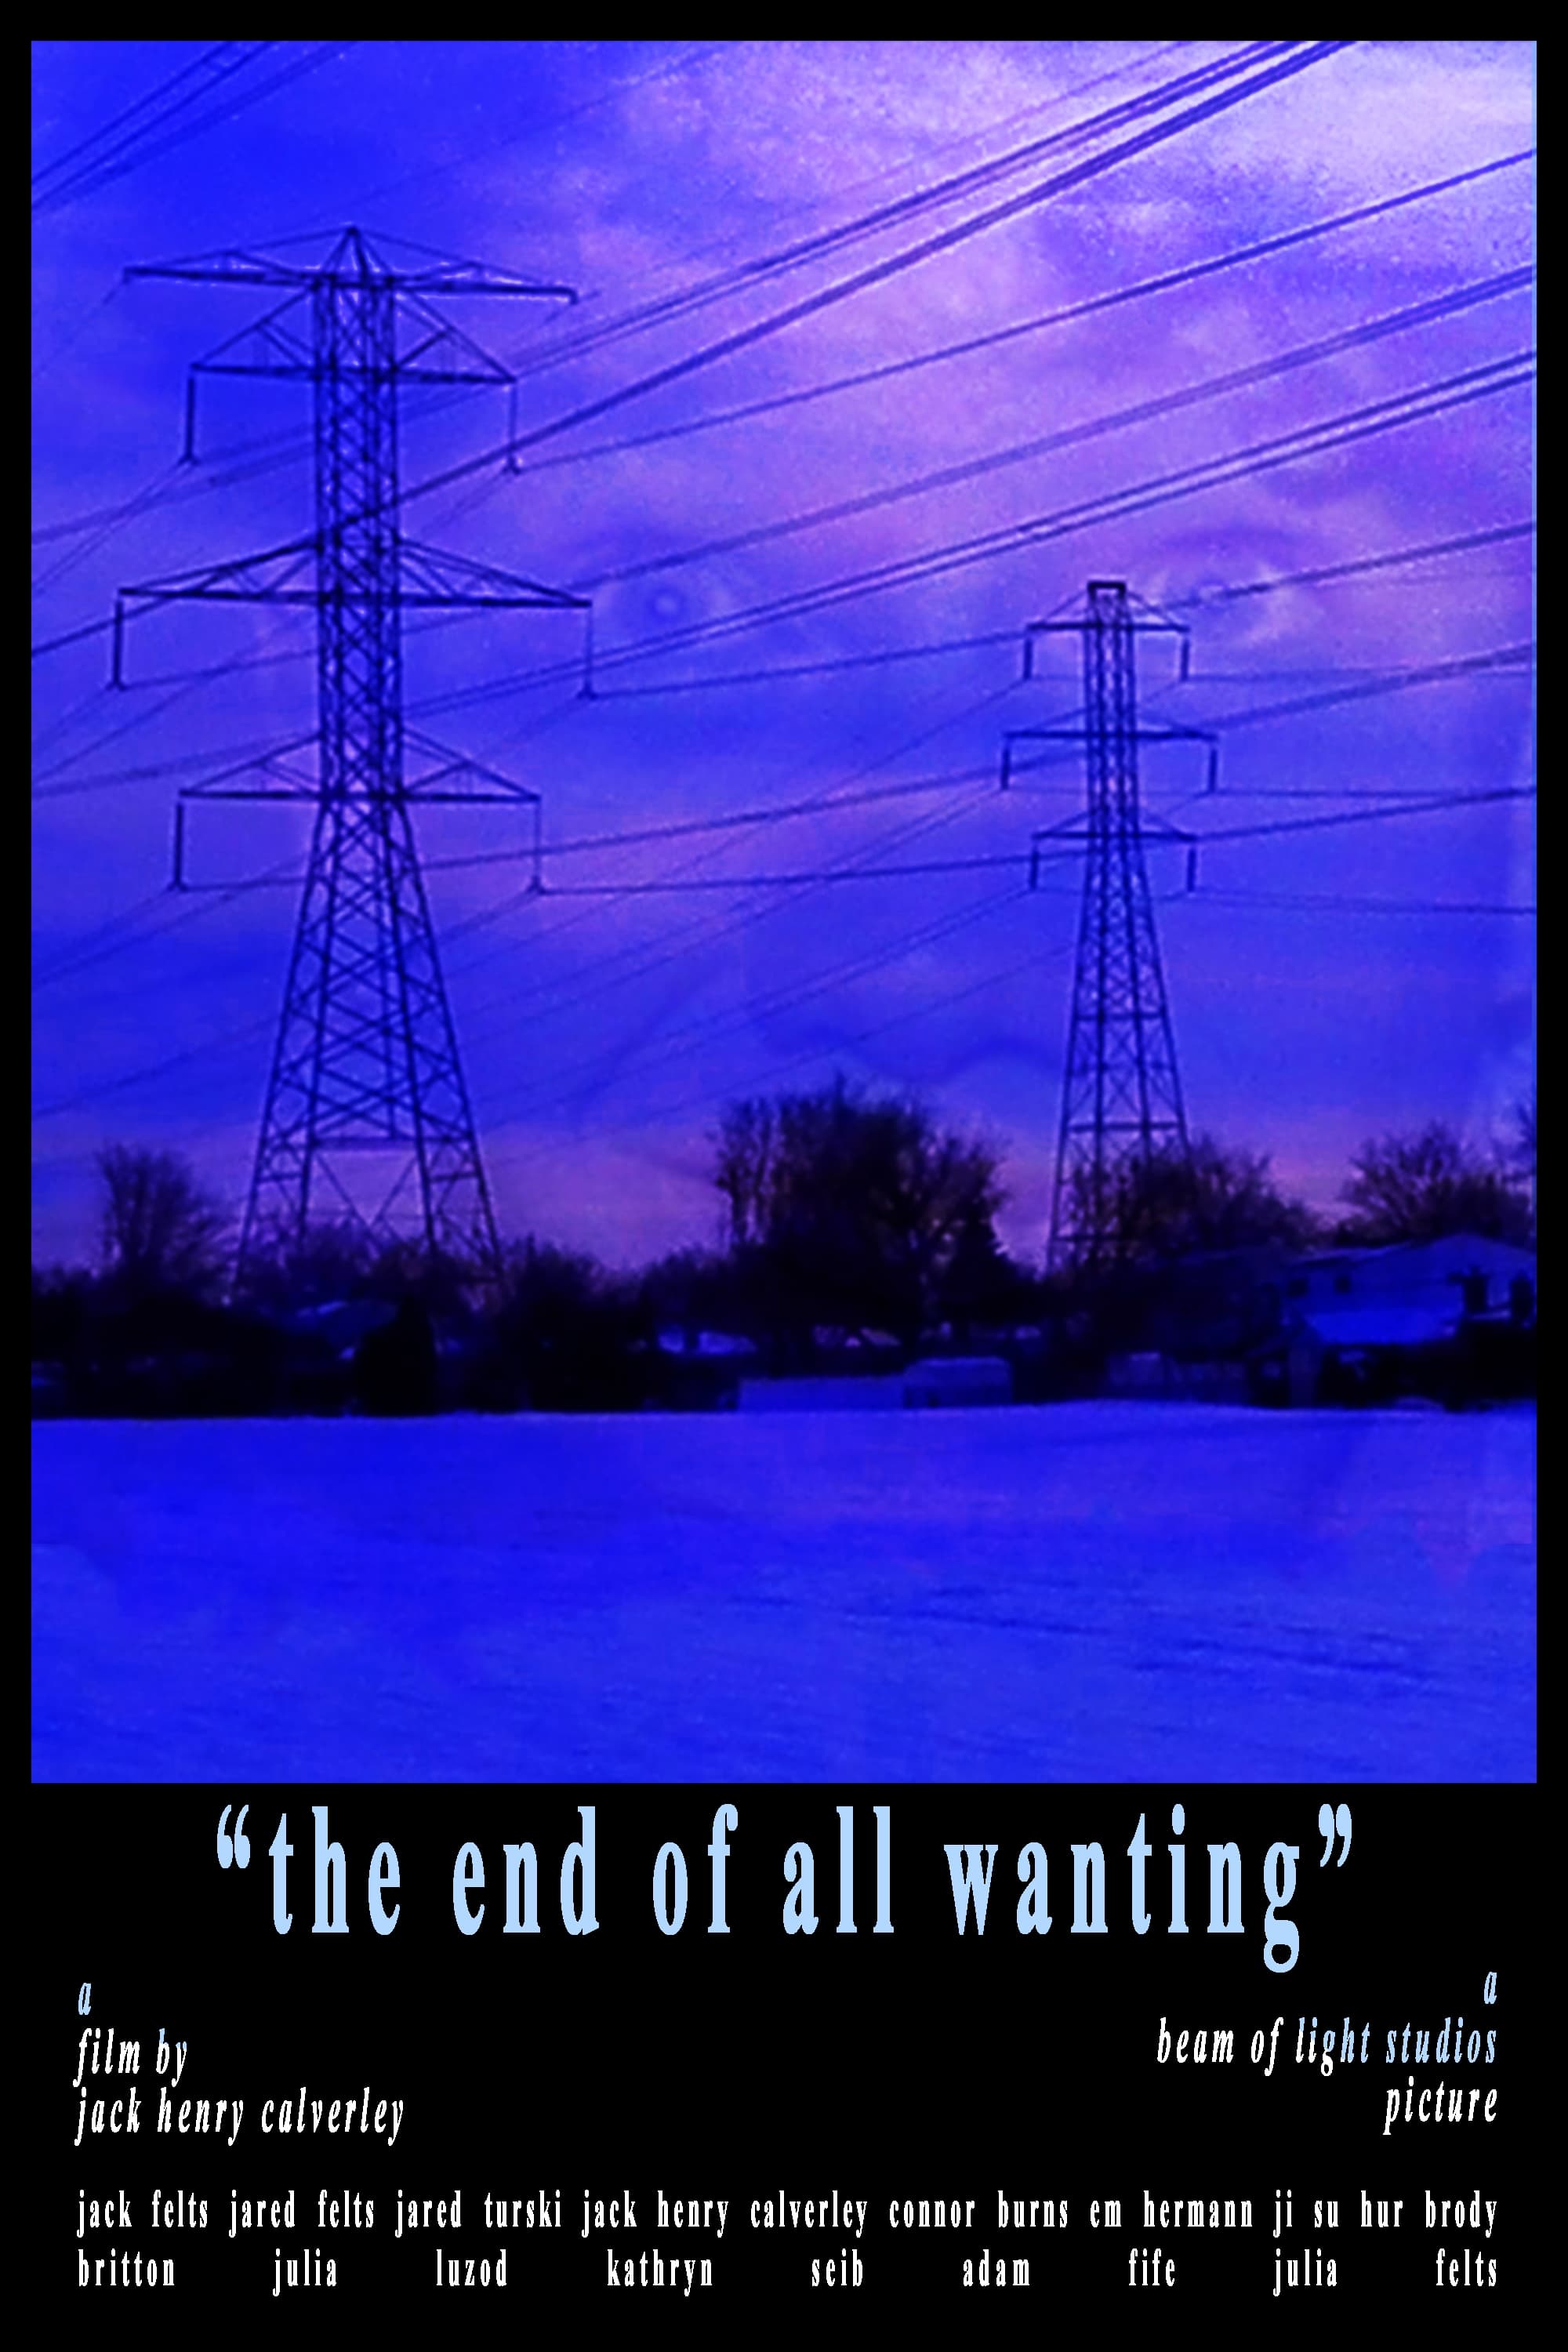 The End of All Wanting